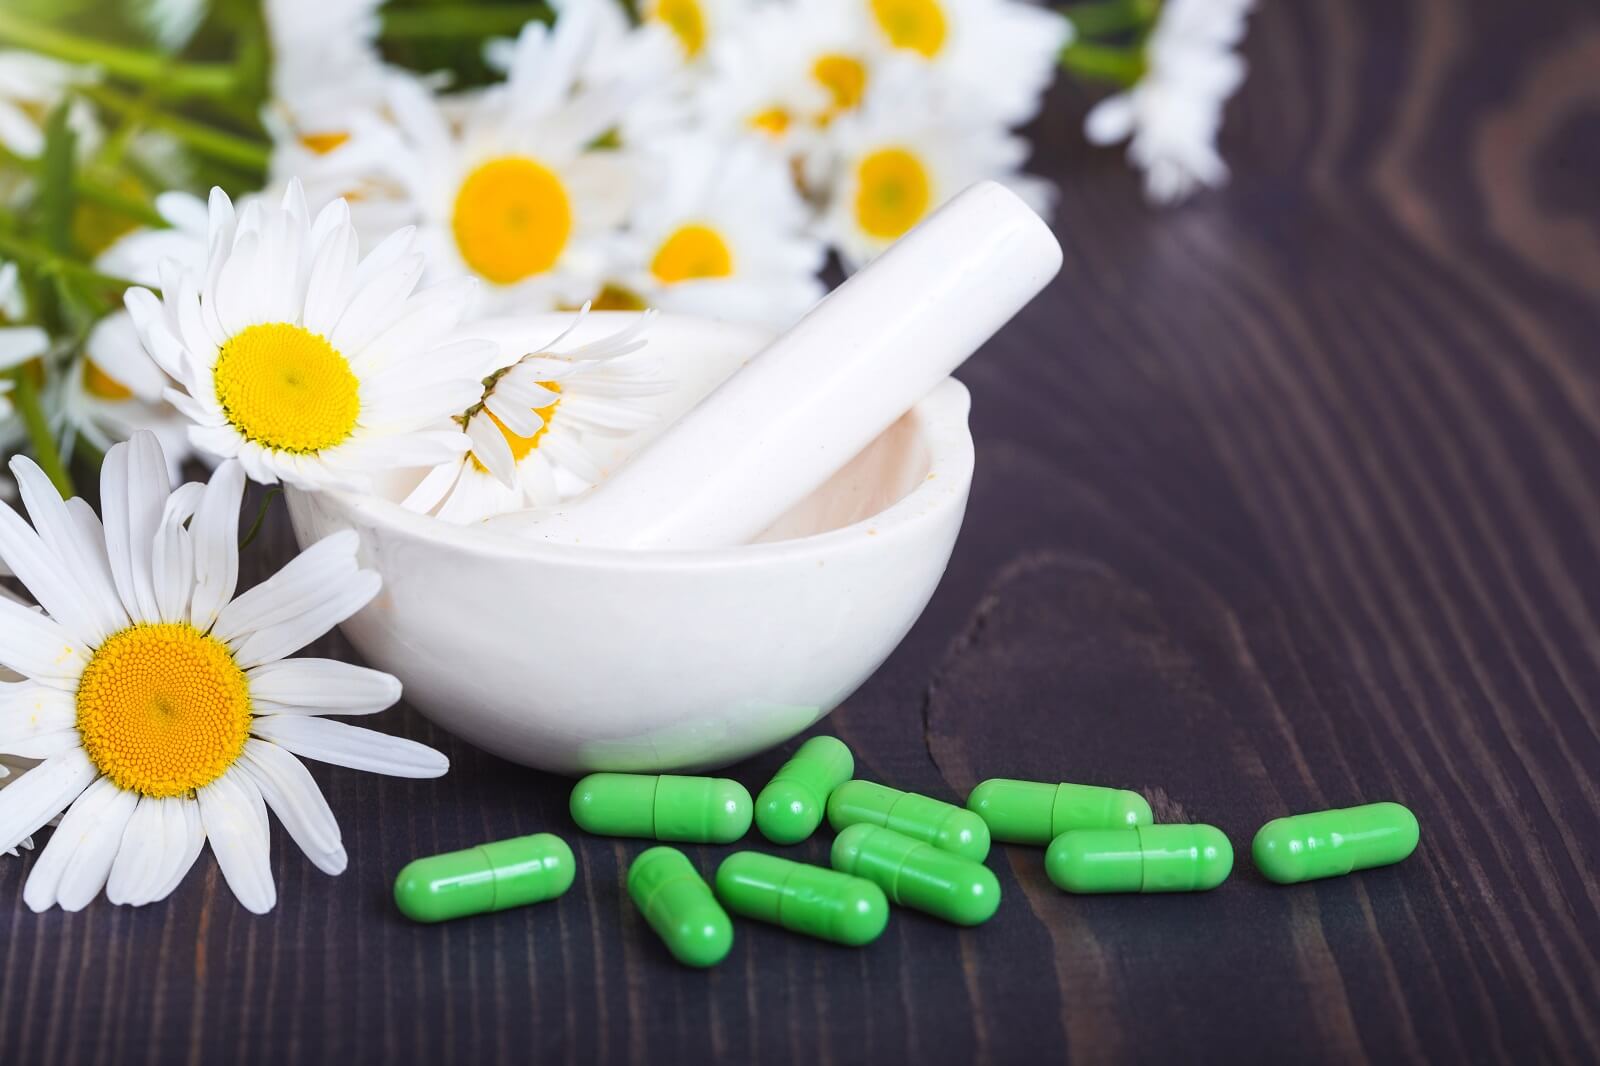 Chamomile flowers, white mortar and pestle, and green phytotherapeutic capsules